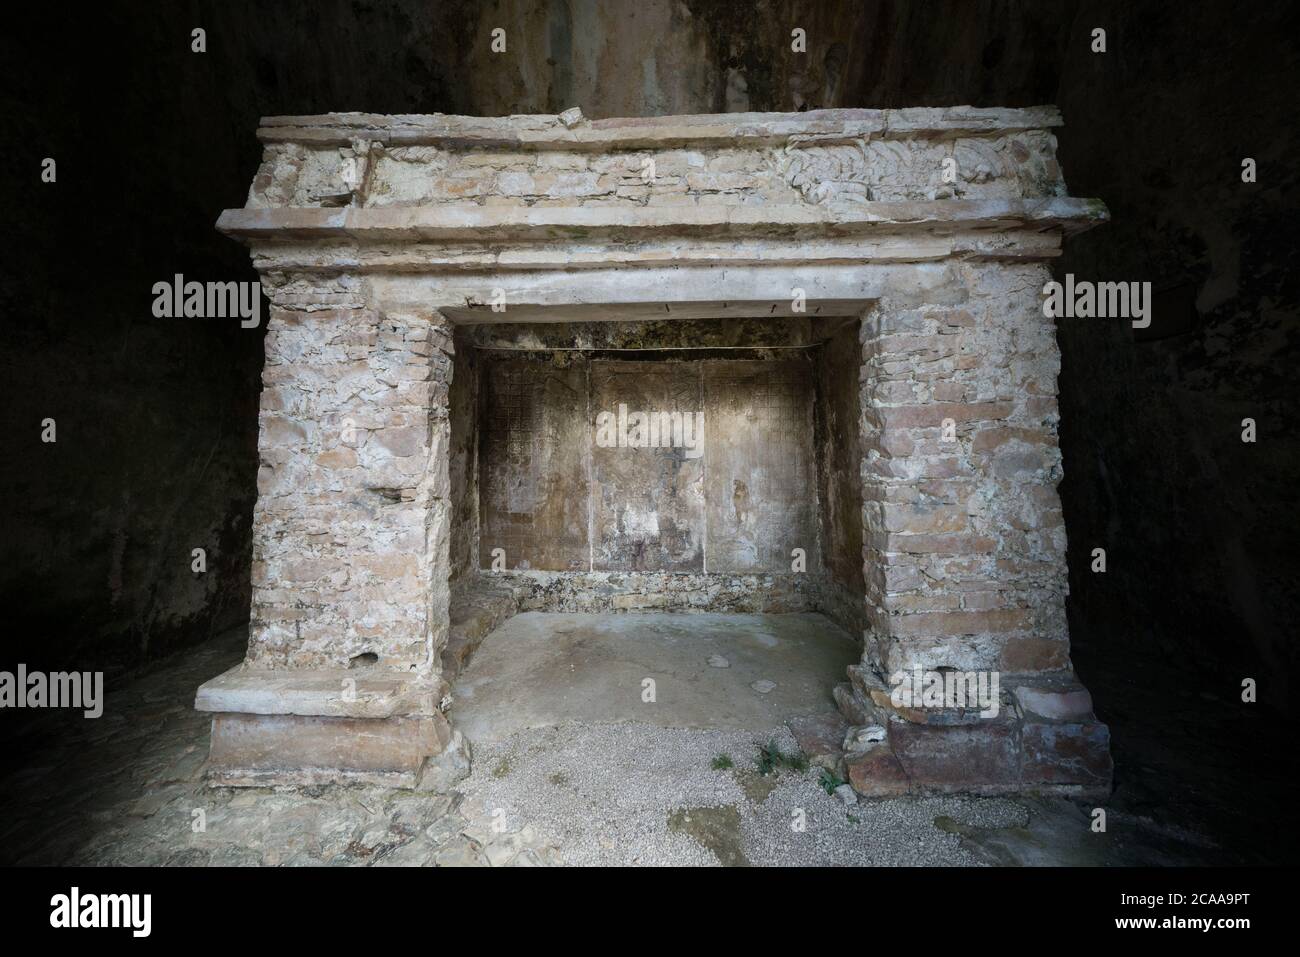 The carved stone panel in the Temple of the Foliated Cross showing K’inich Kan B’ahlam in the ruins of the Mayan city of Palenque,  Palenque National Stock Photo